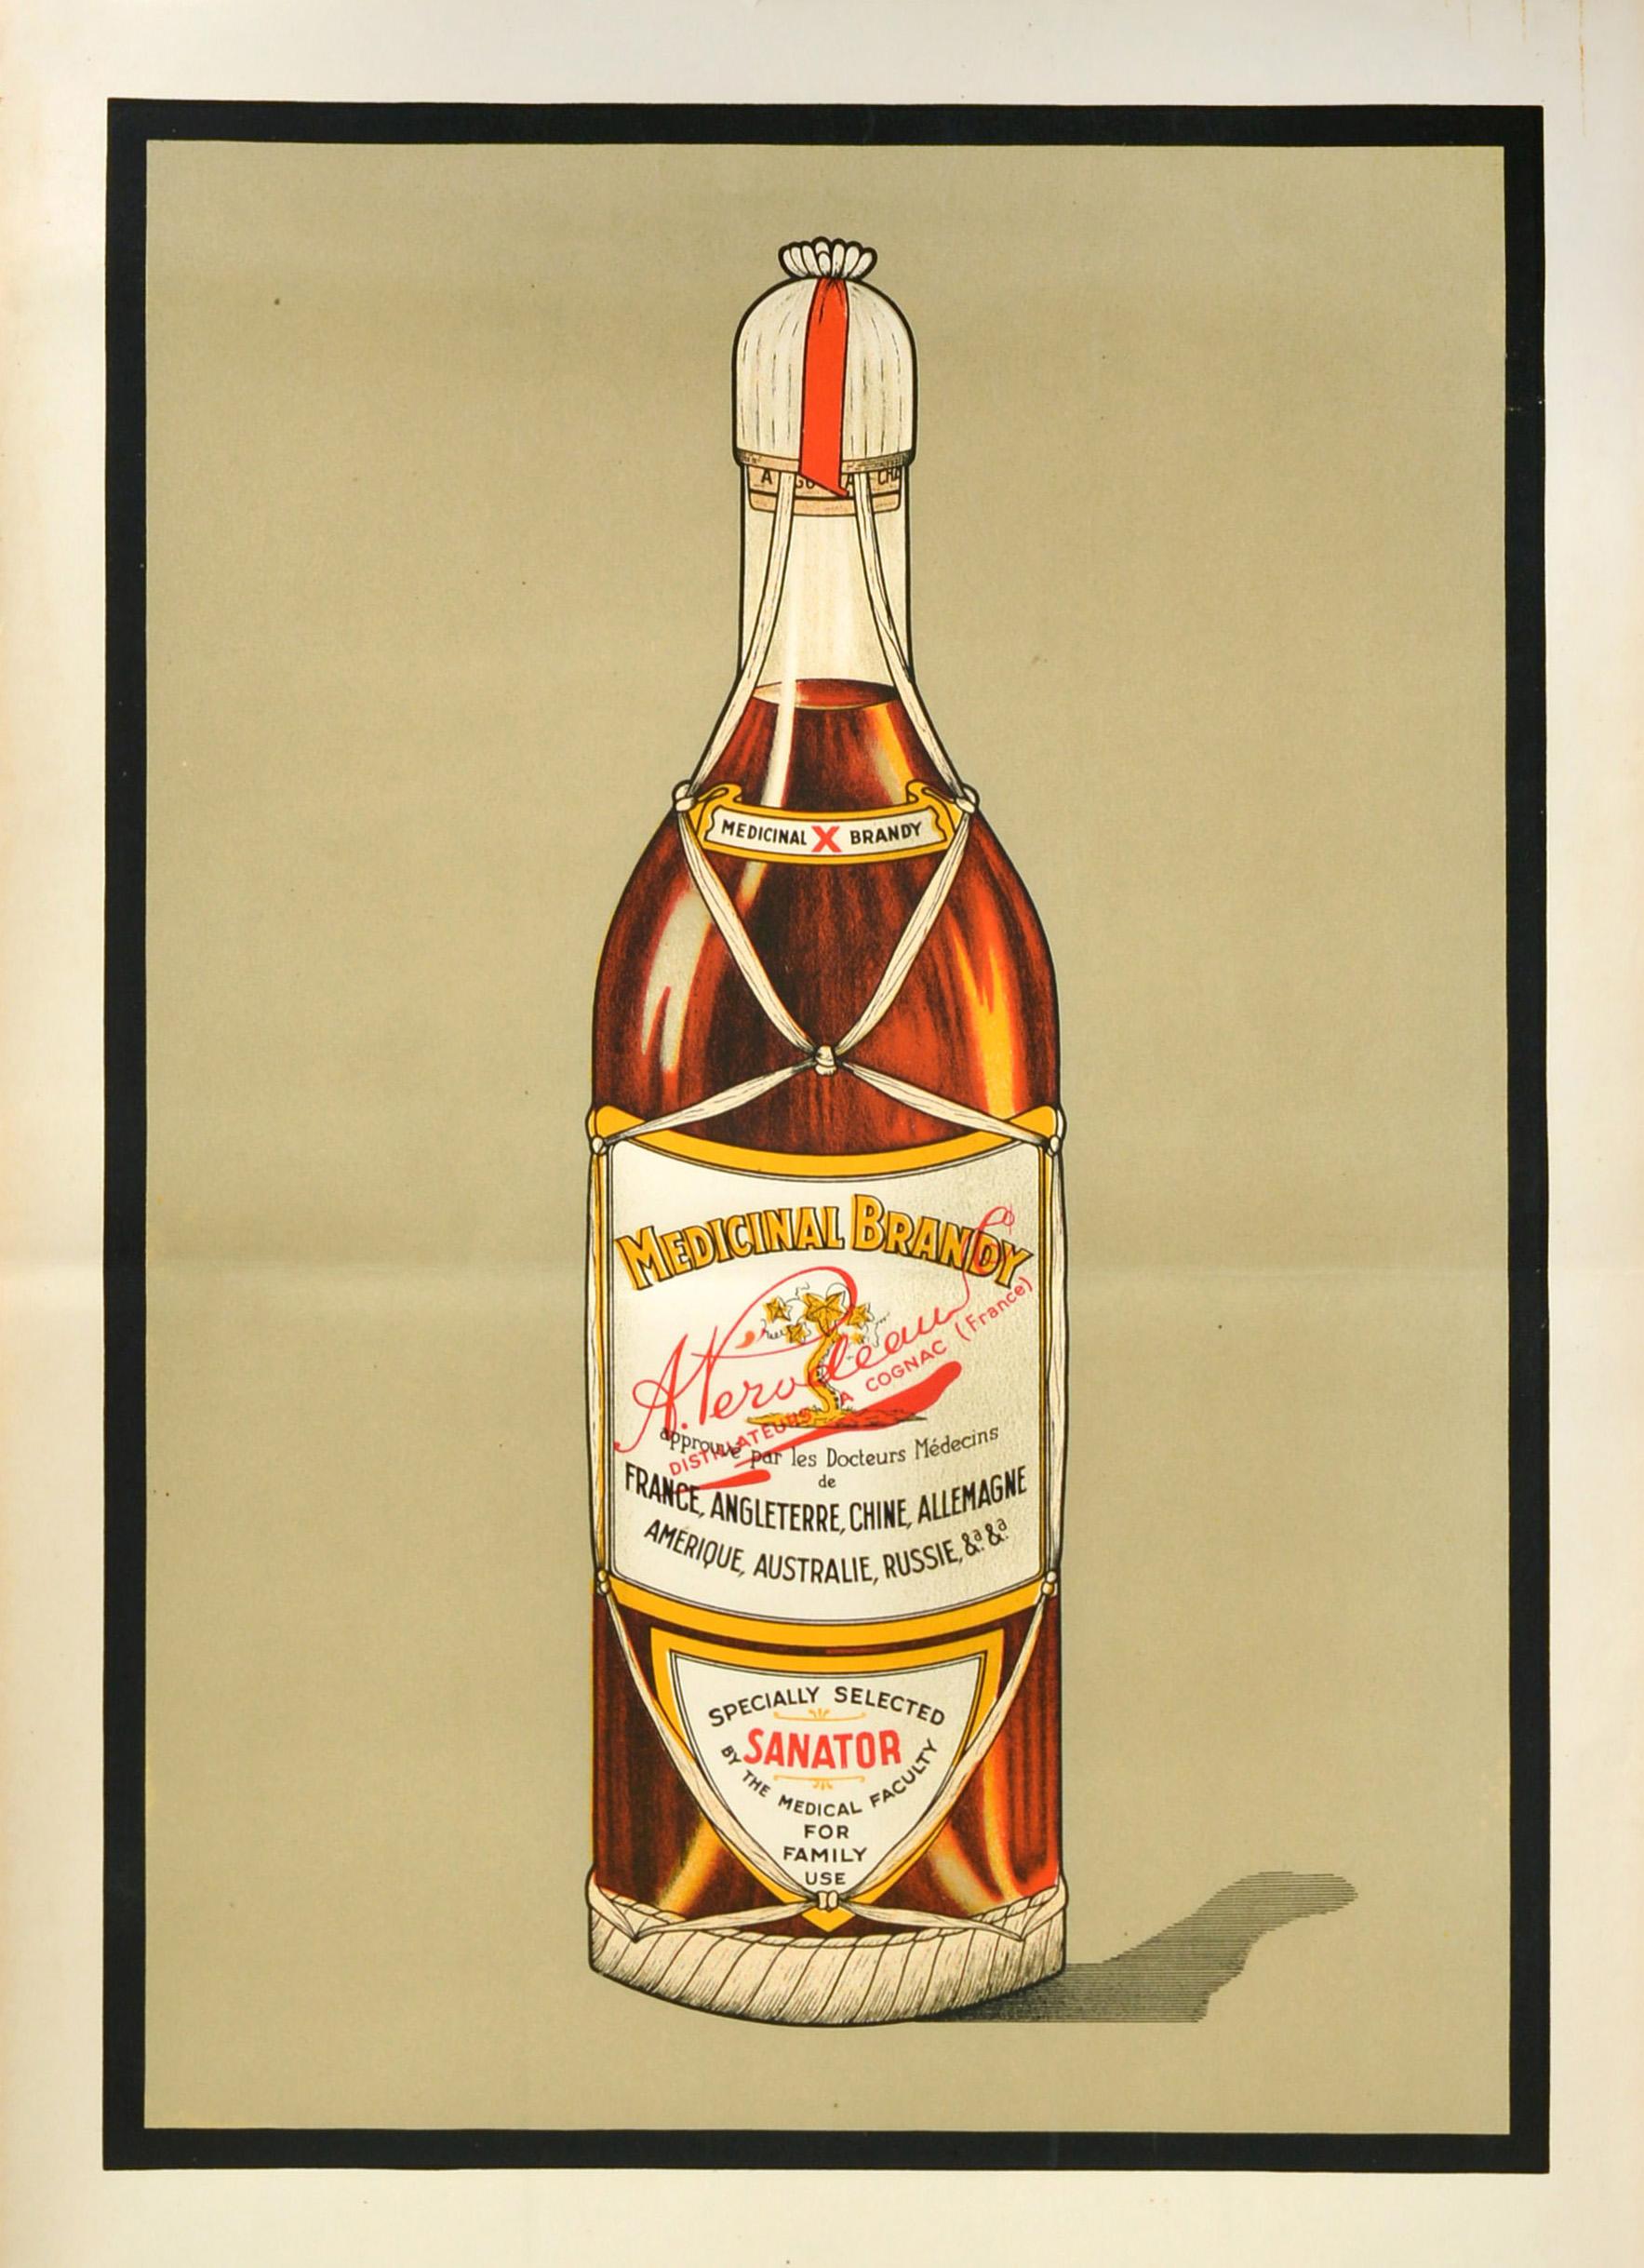 Original vintage drink advertising poster for Medicinal Brandy A. Perodeau Sanator featuring an image of the bottle of alcohol at the top with the label information in French and English - Medicinal X Brandy distillateurs a Cognac France approve par